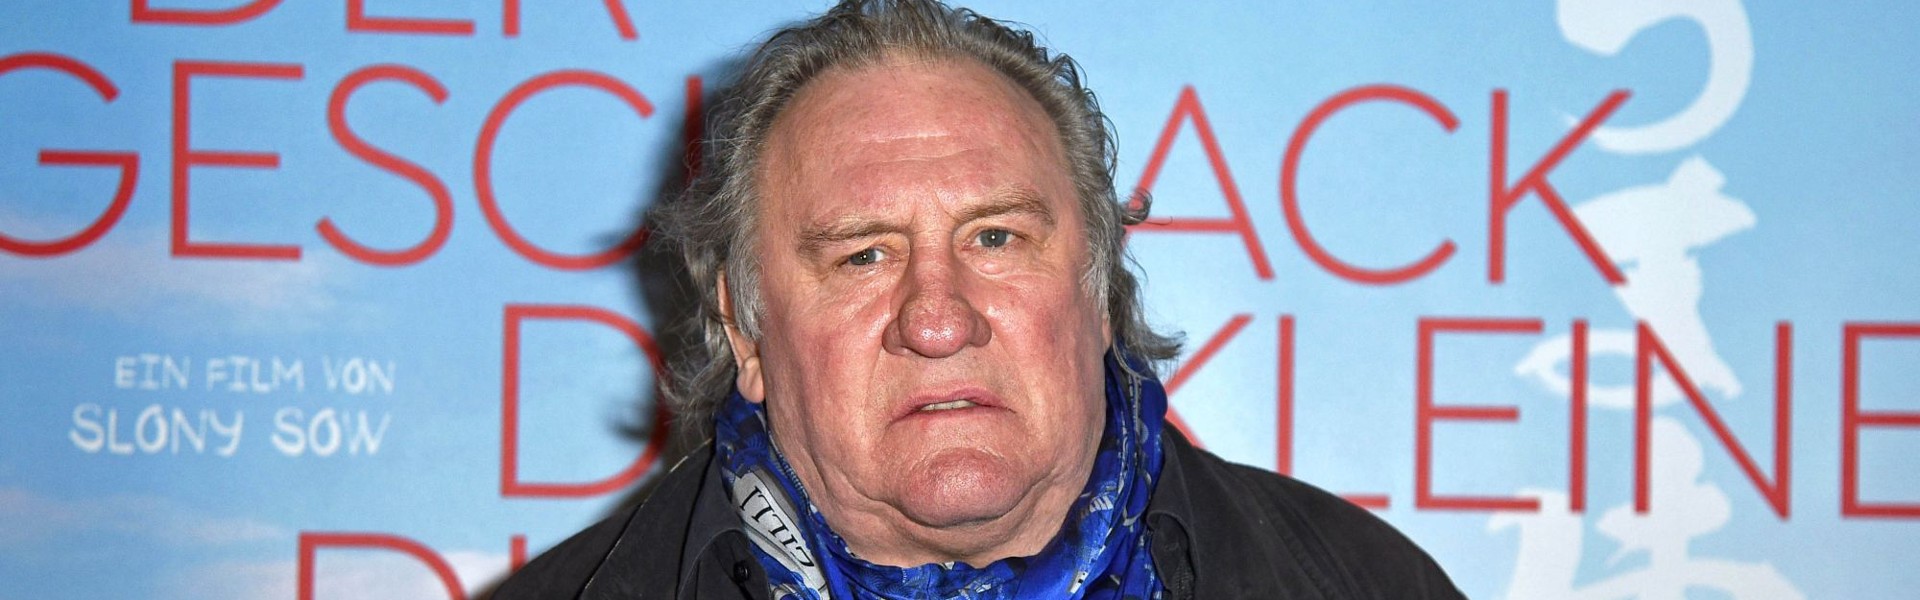 Gérard Depardieu: 50 French Stars Rally in Defense of the Actor